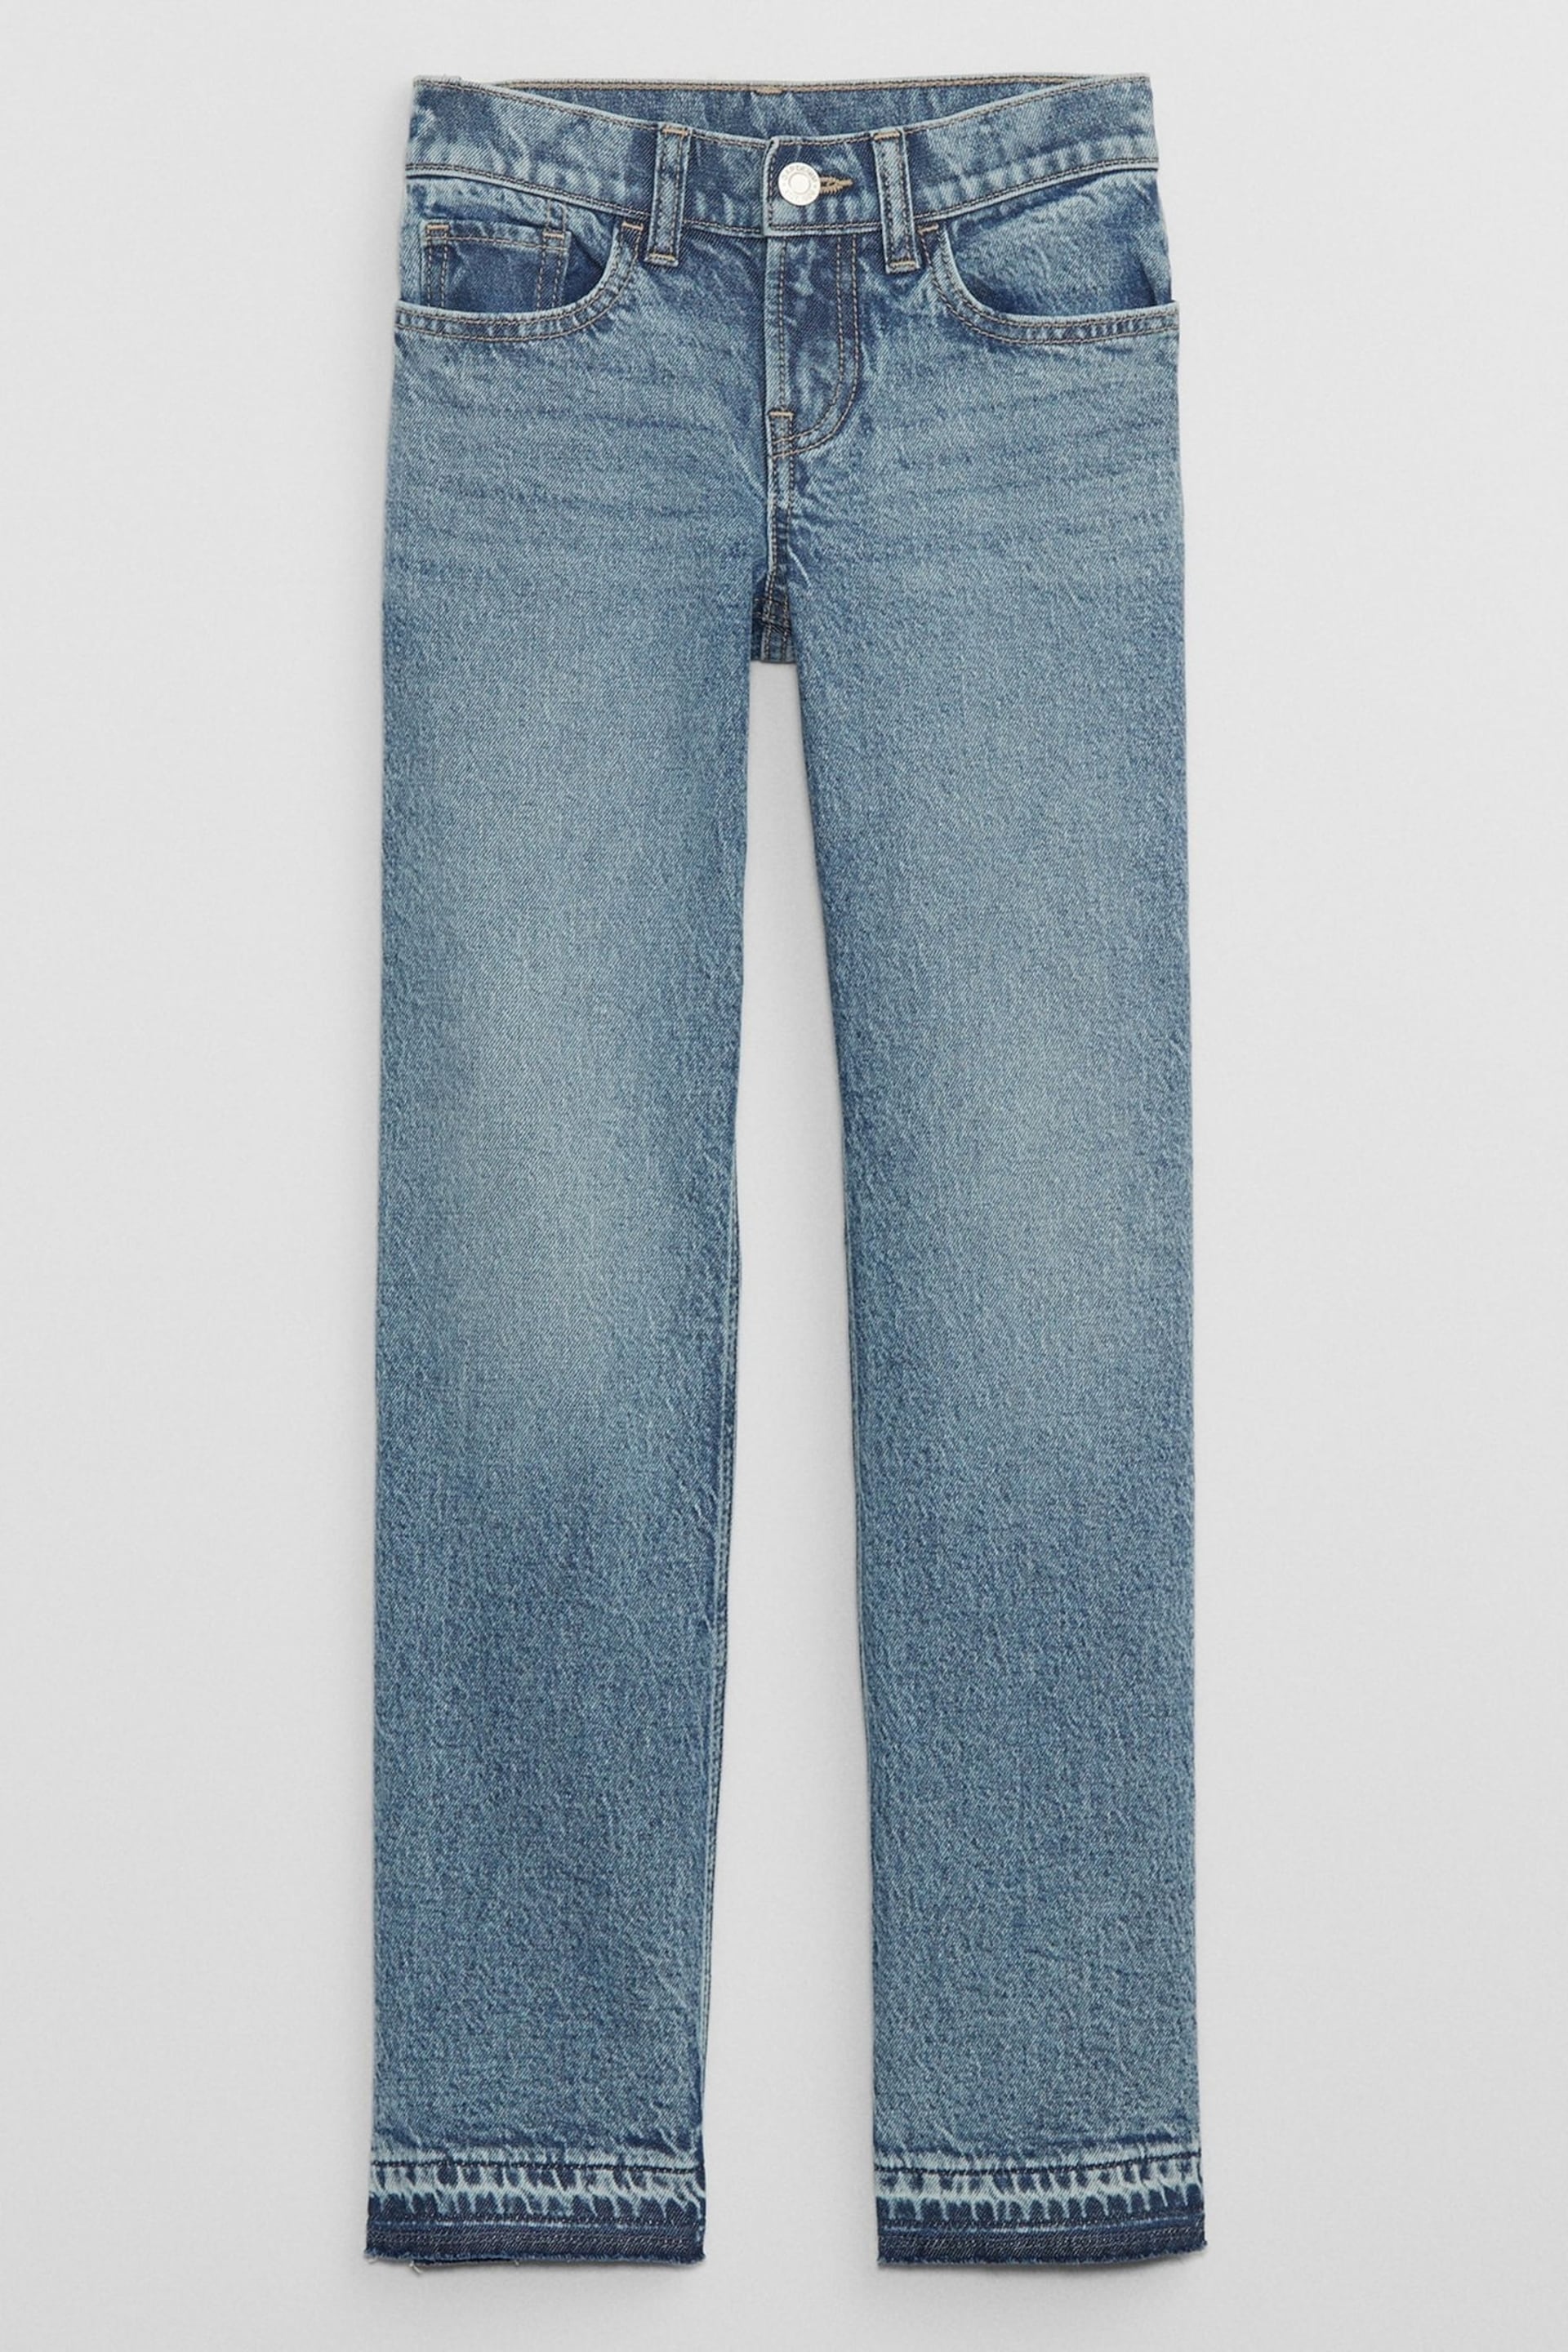 Gap Vintage Wash Blue Mid Rise Straight Washwell Jeans (5-14yrs) - Image 1 of 3